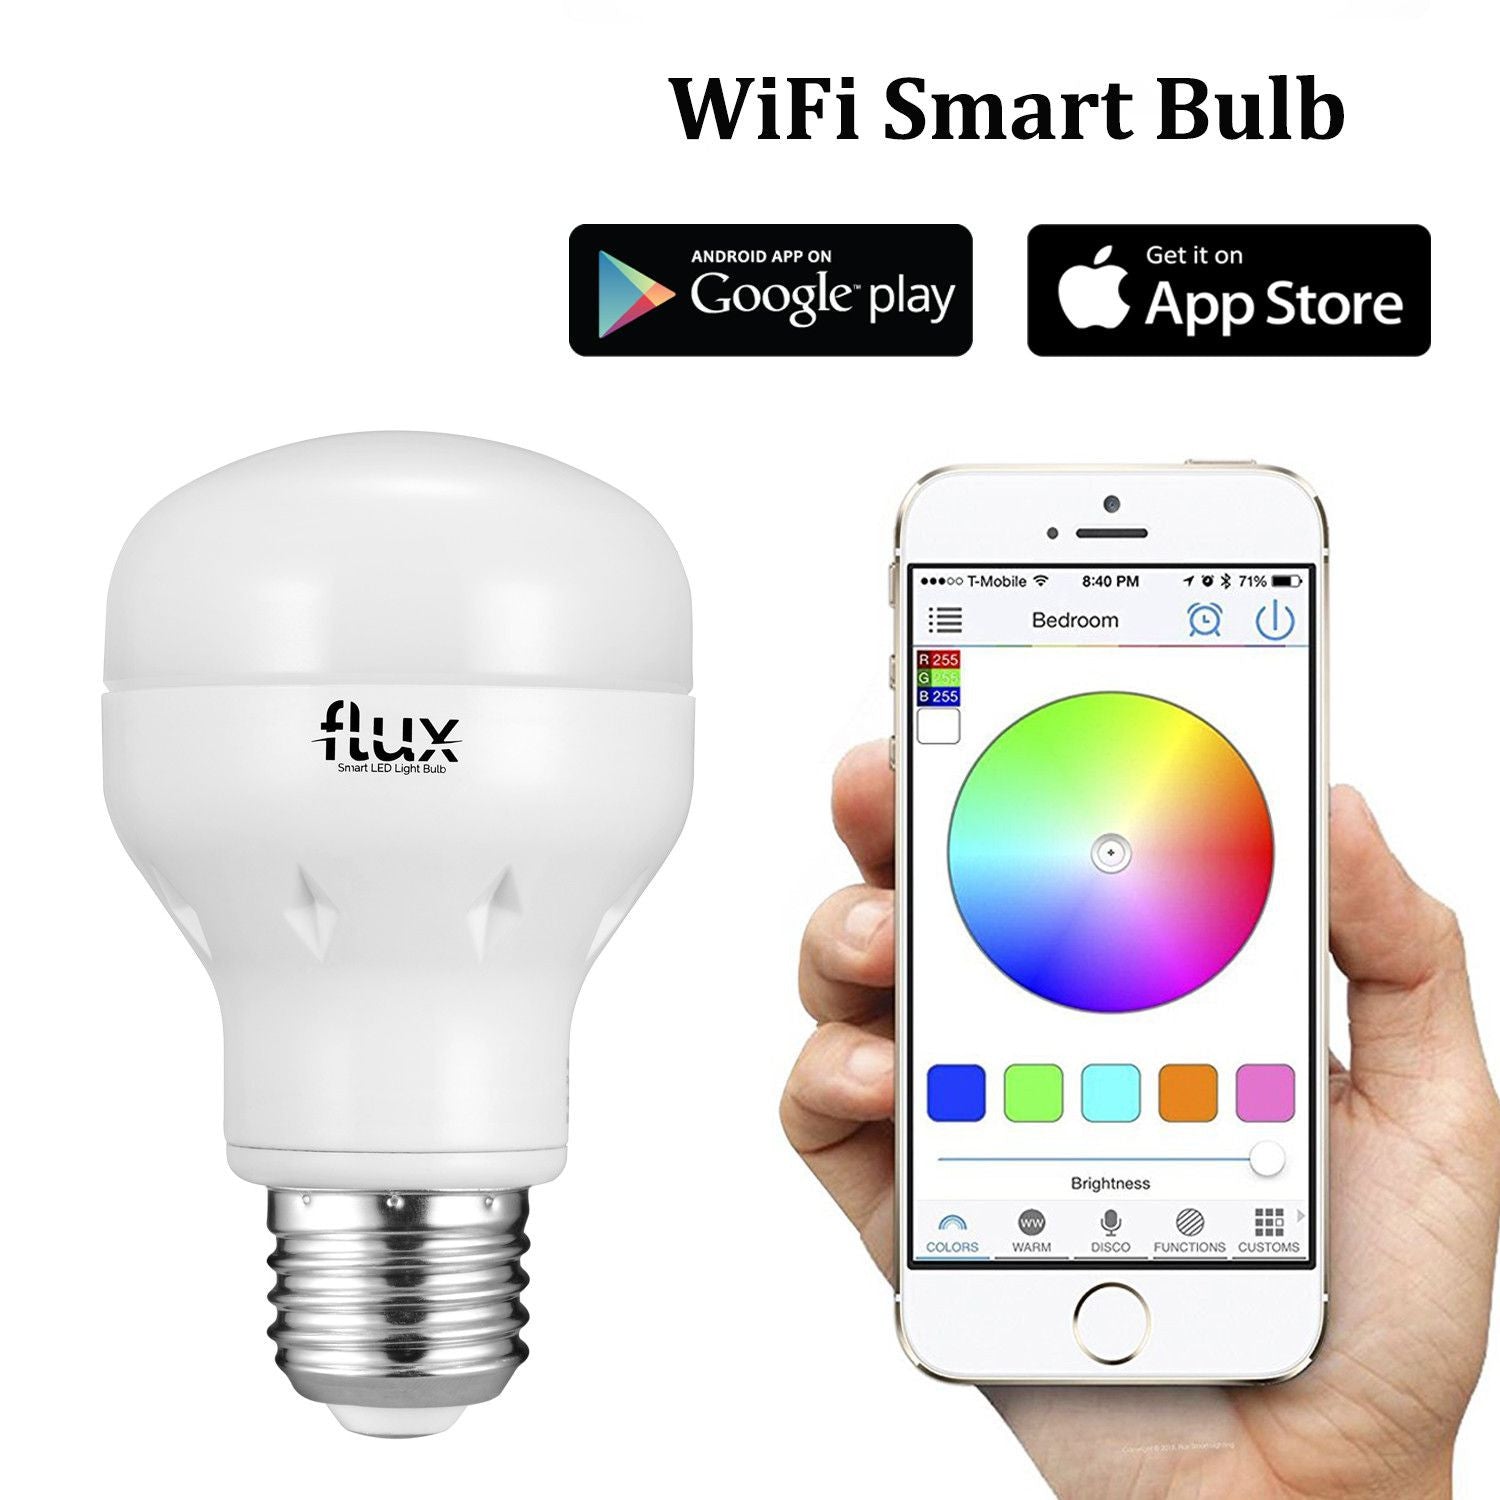 Wifi Smart Led Light Bulb 2nd Generation Works With Amazon Alexa Multicolor Dimmable Wireless Lighting